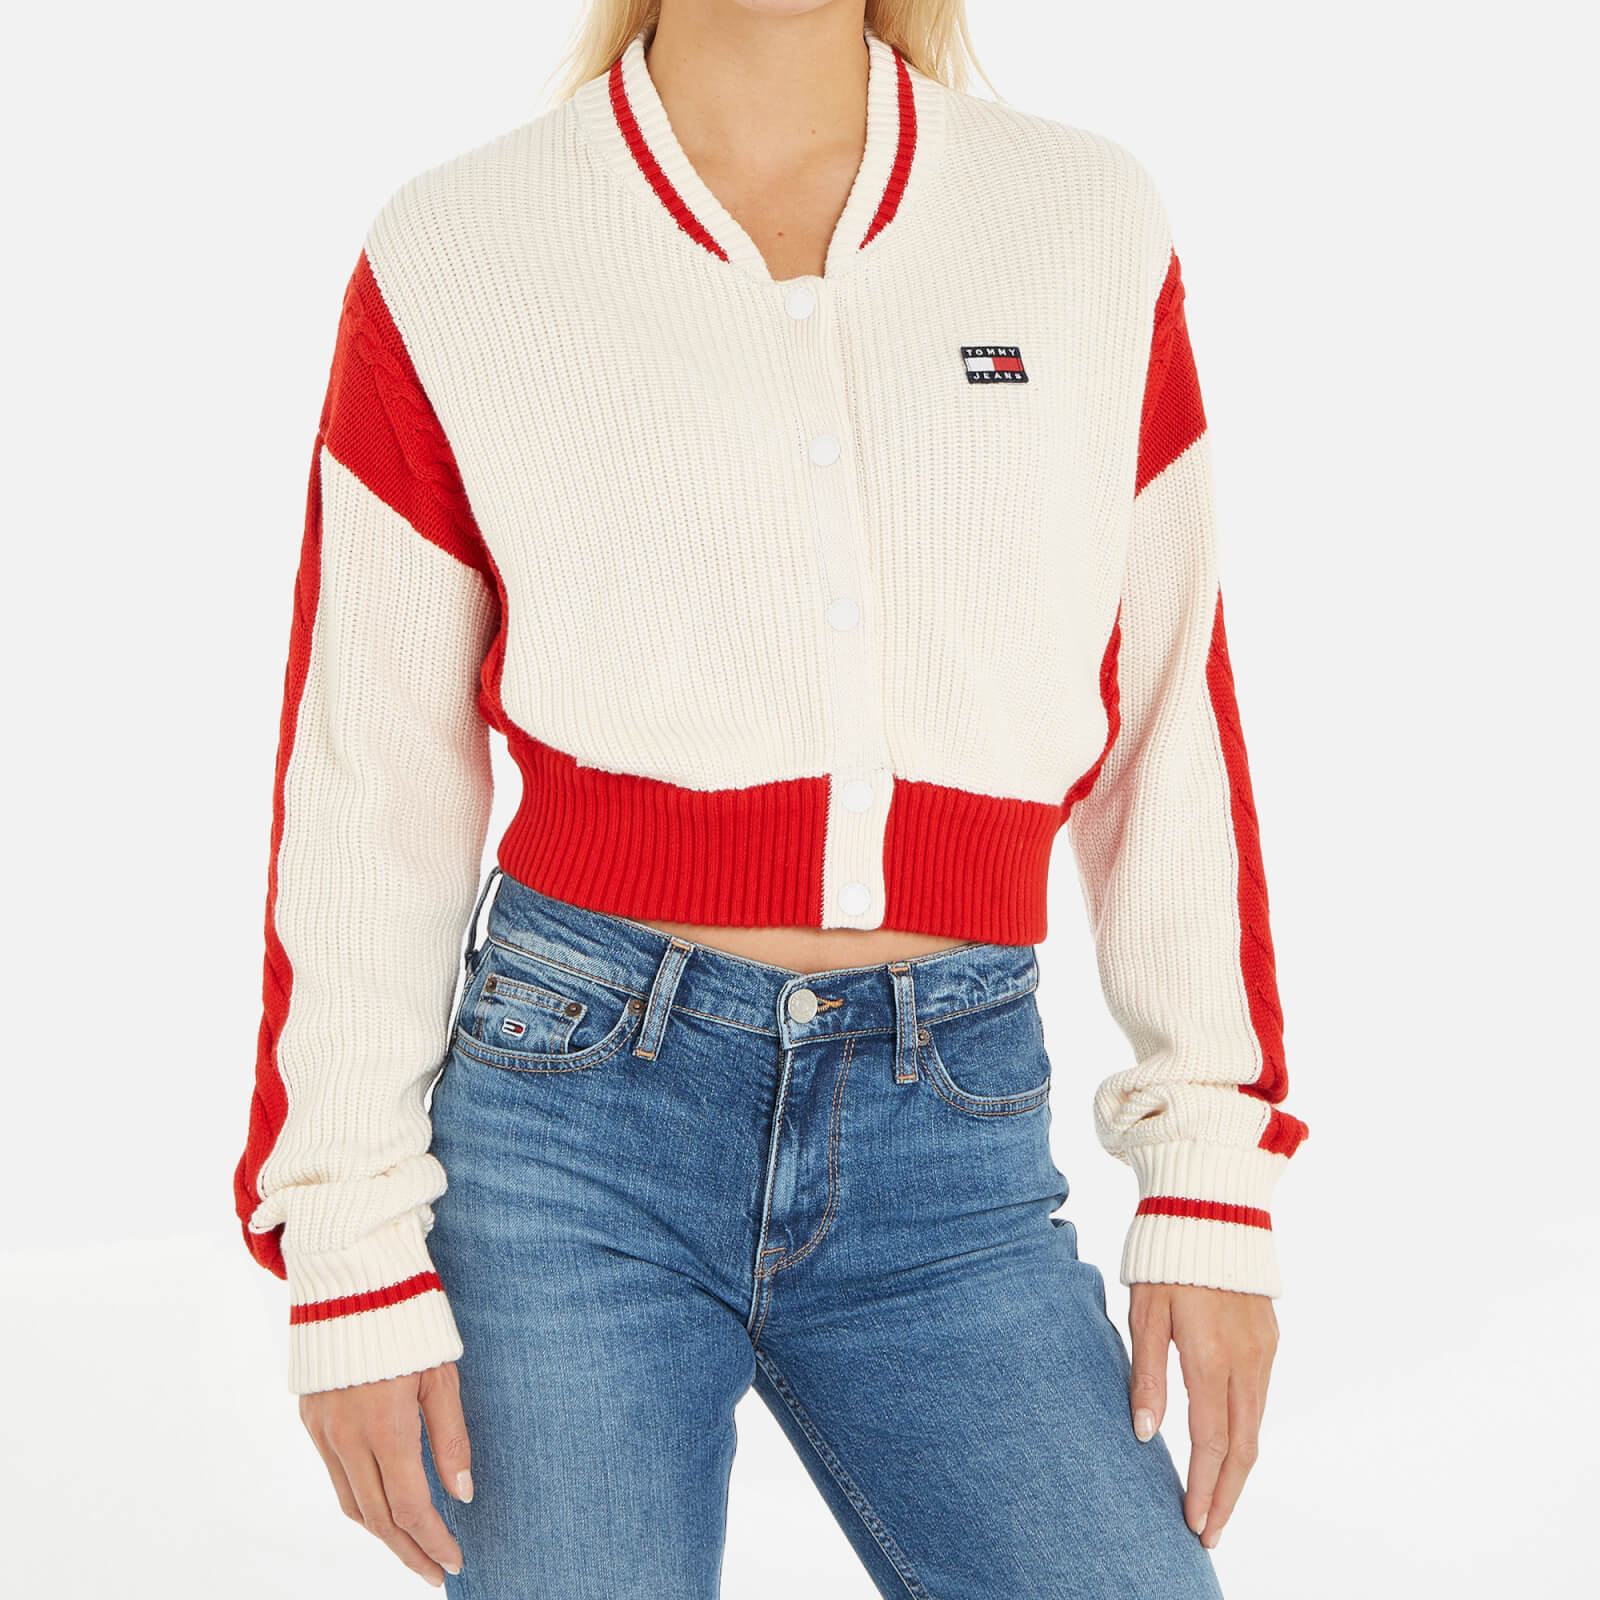 Tommy Jeans Archive 2 Organic Cotton-Blend Bomber Jacket product